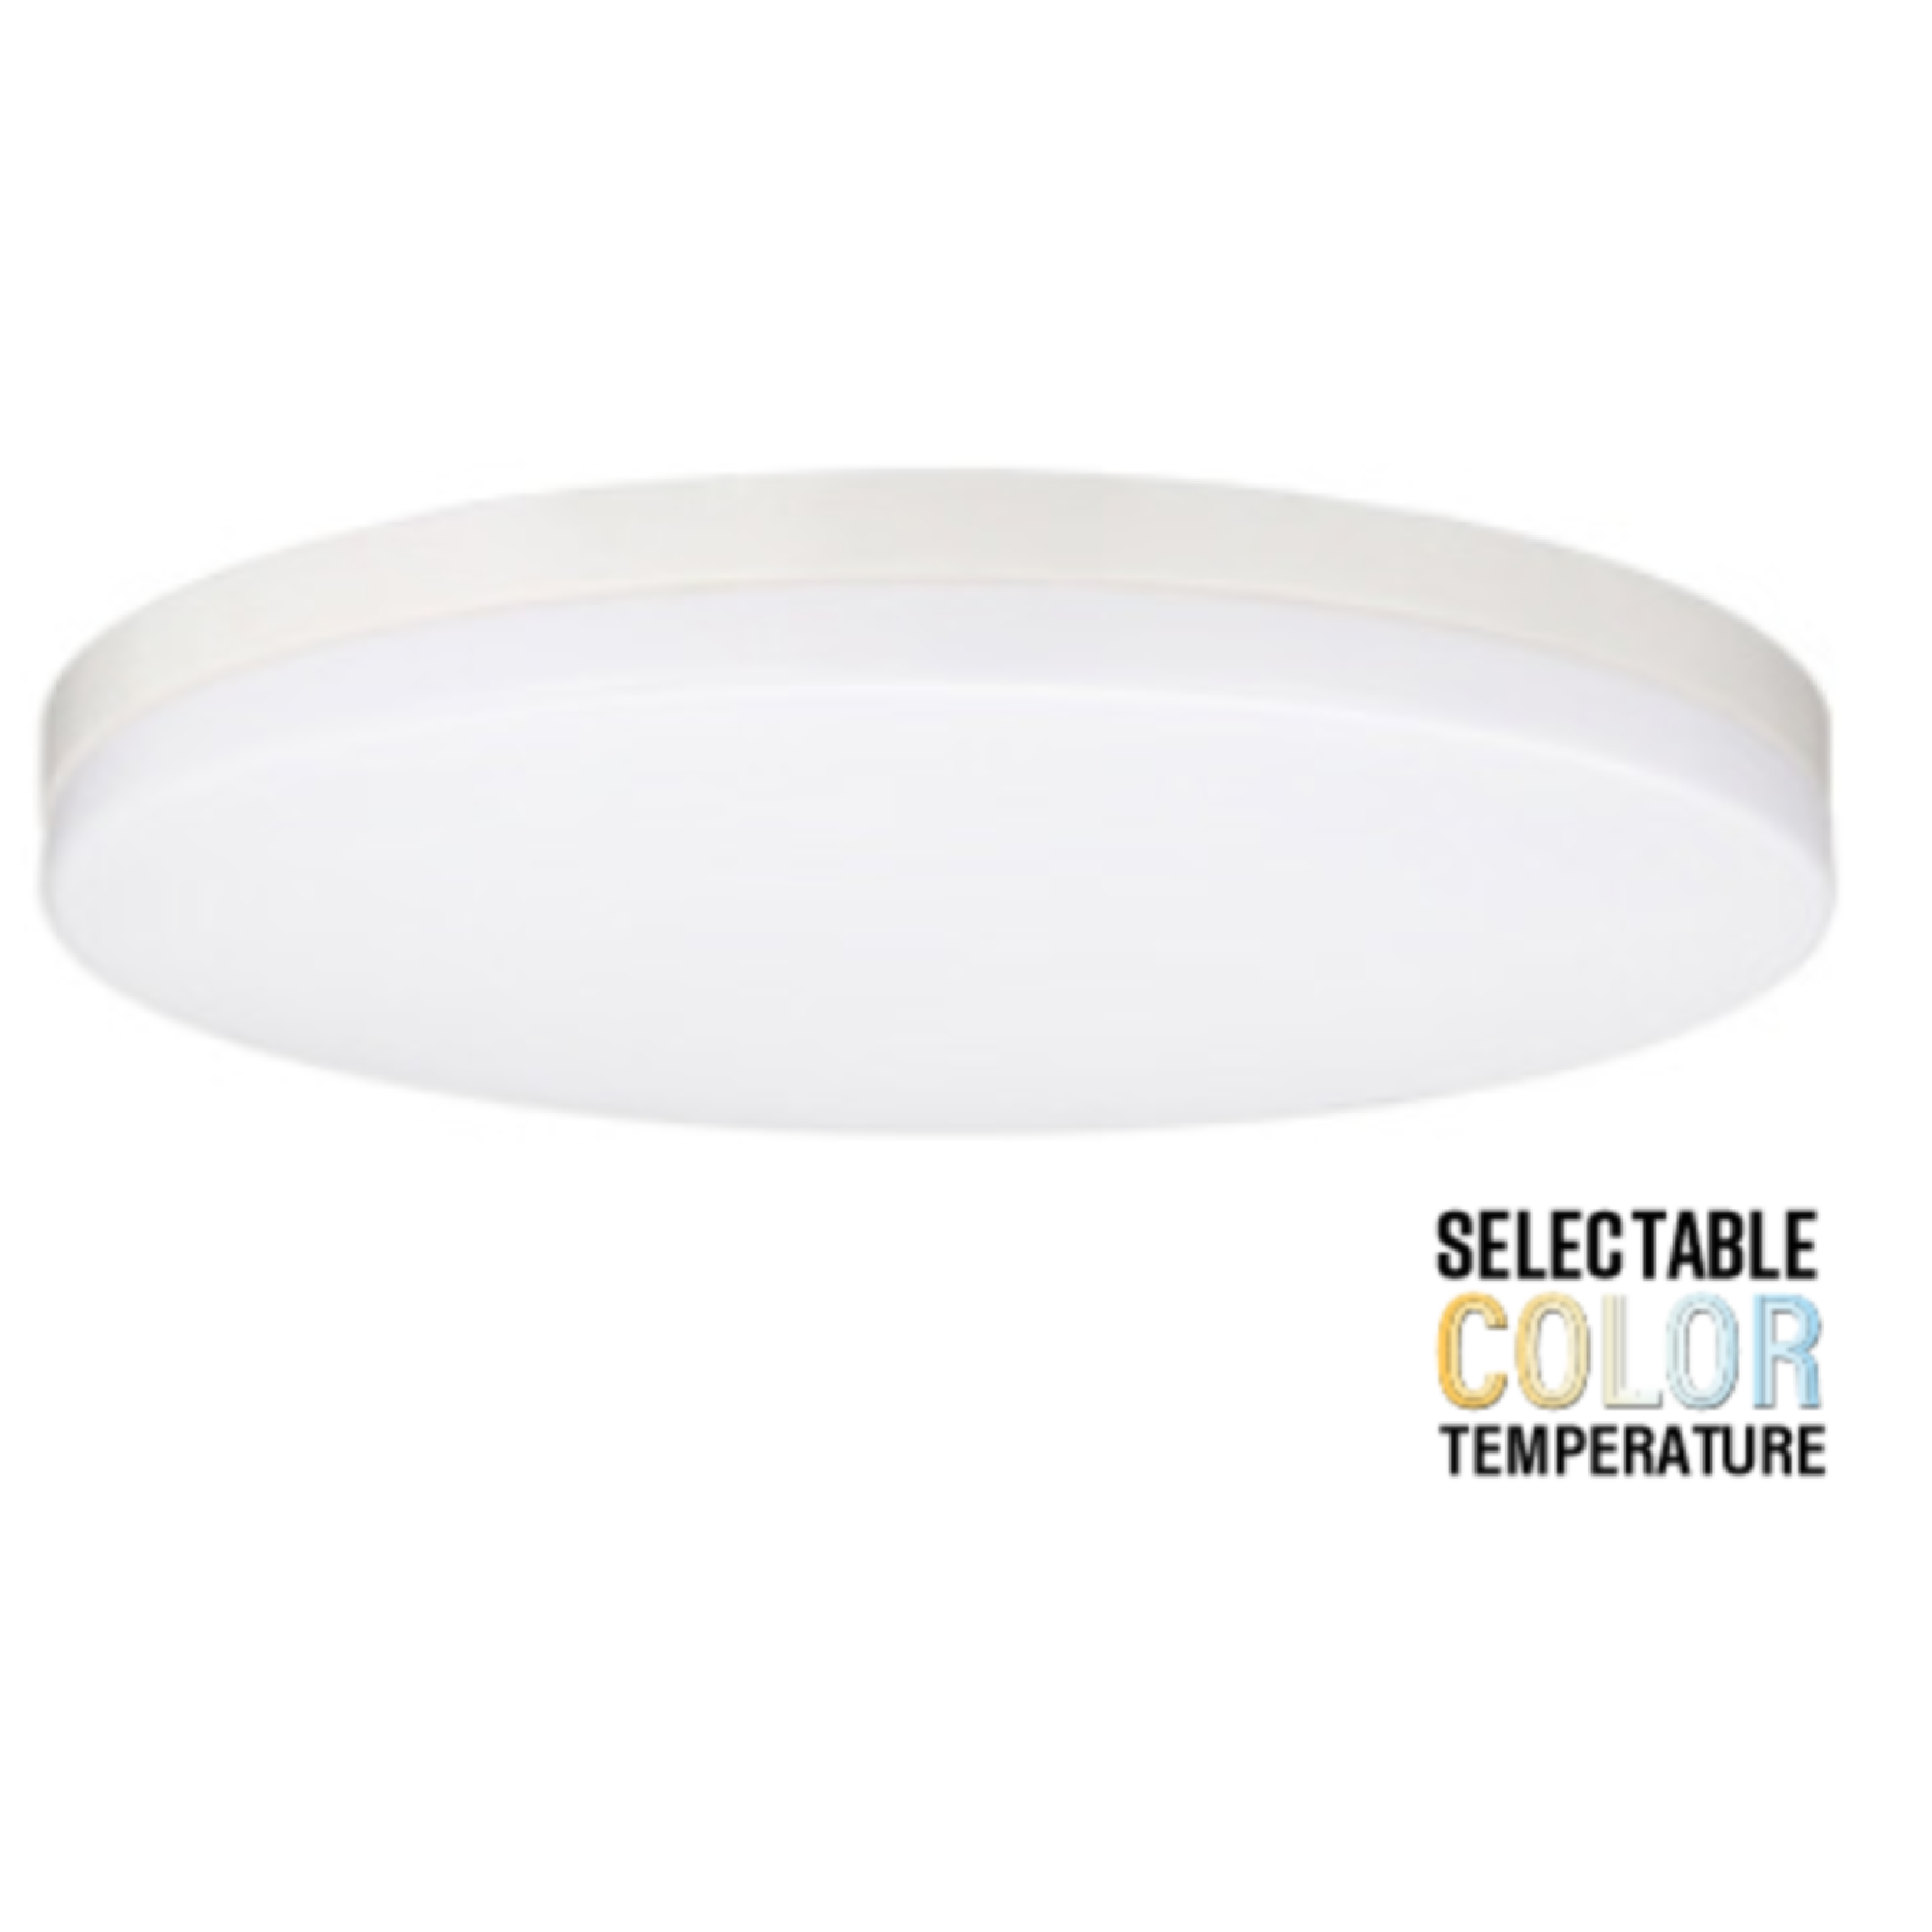 13 Inch Round Ceiling Light, Surface Mount, Selectable CCT, 1400 Lumens